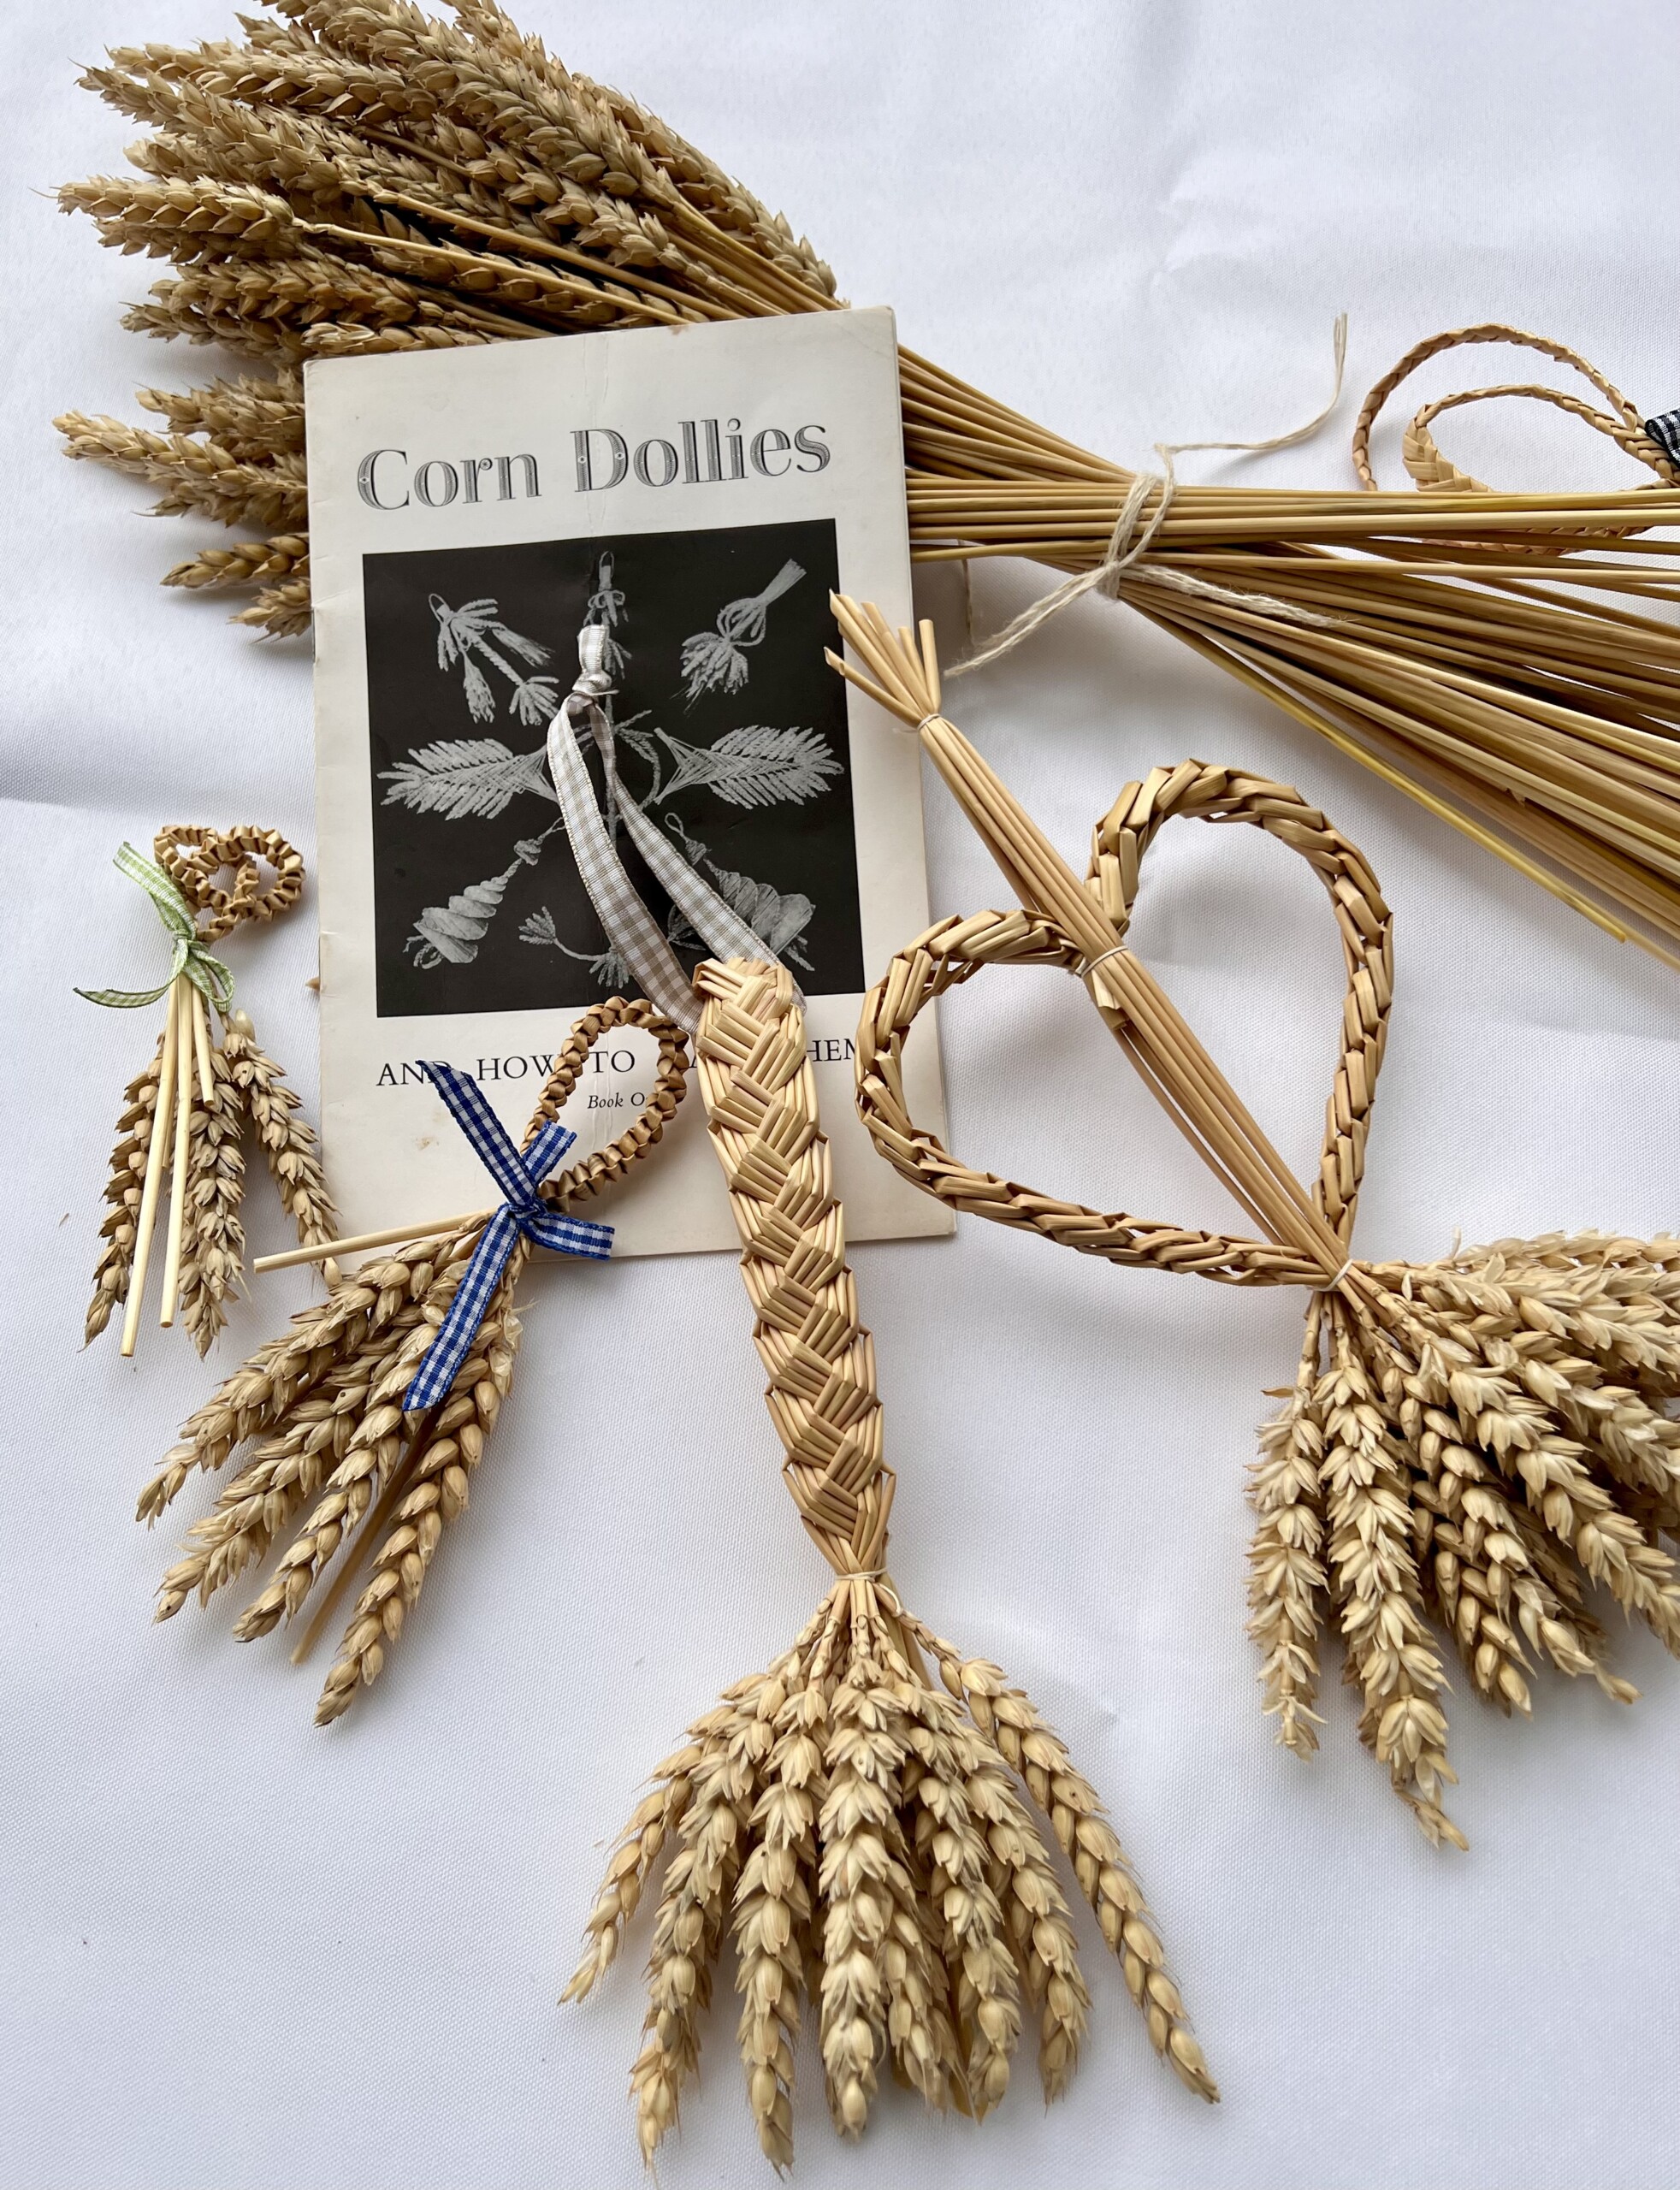 Introduction to Straw work one day course